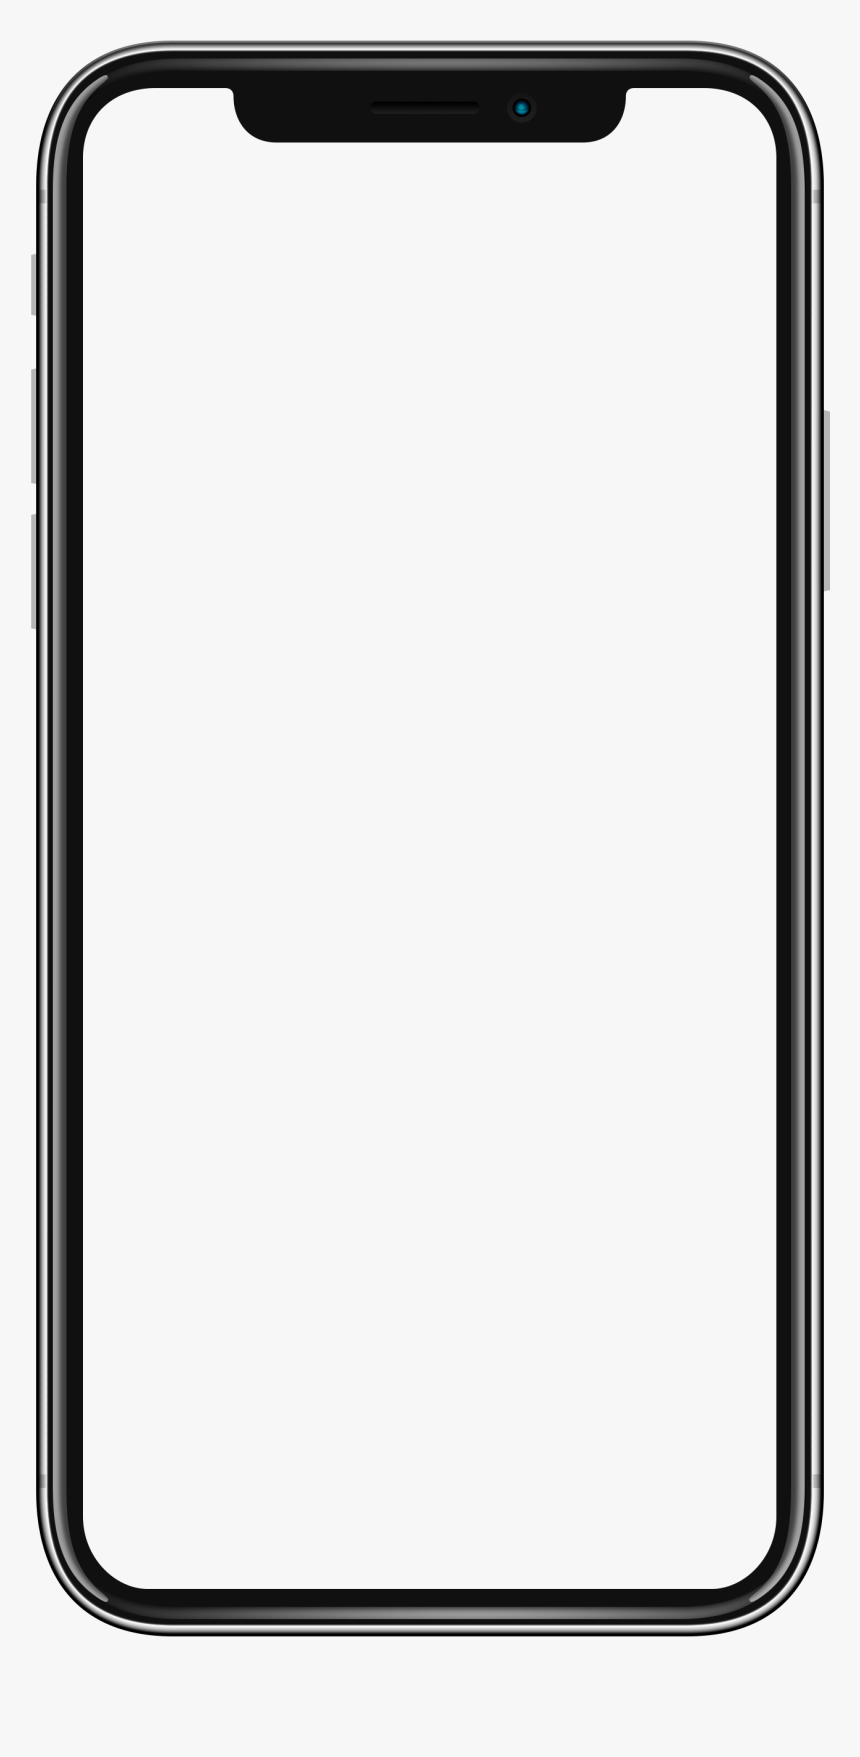 Iphone Frame Png - Iphone X Transparent Background, Png Download, Free Download